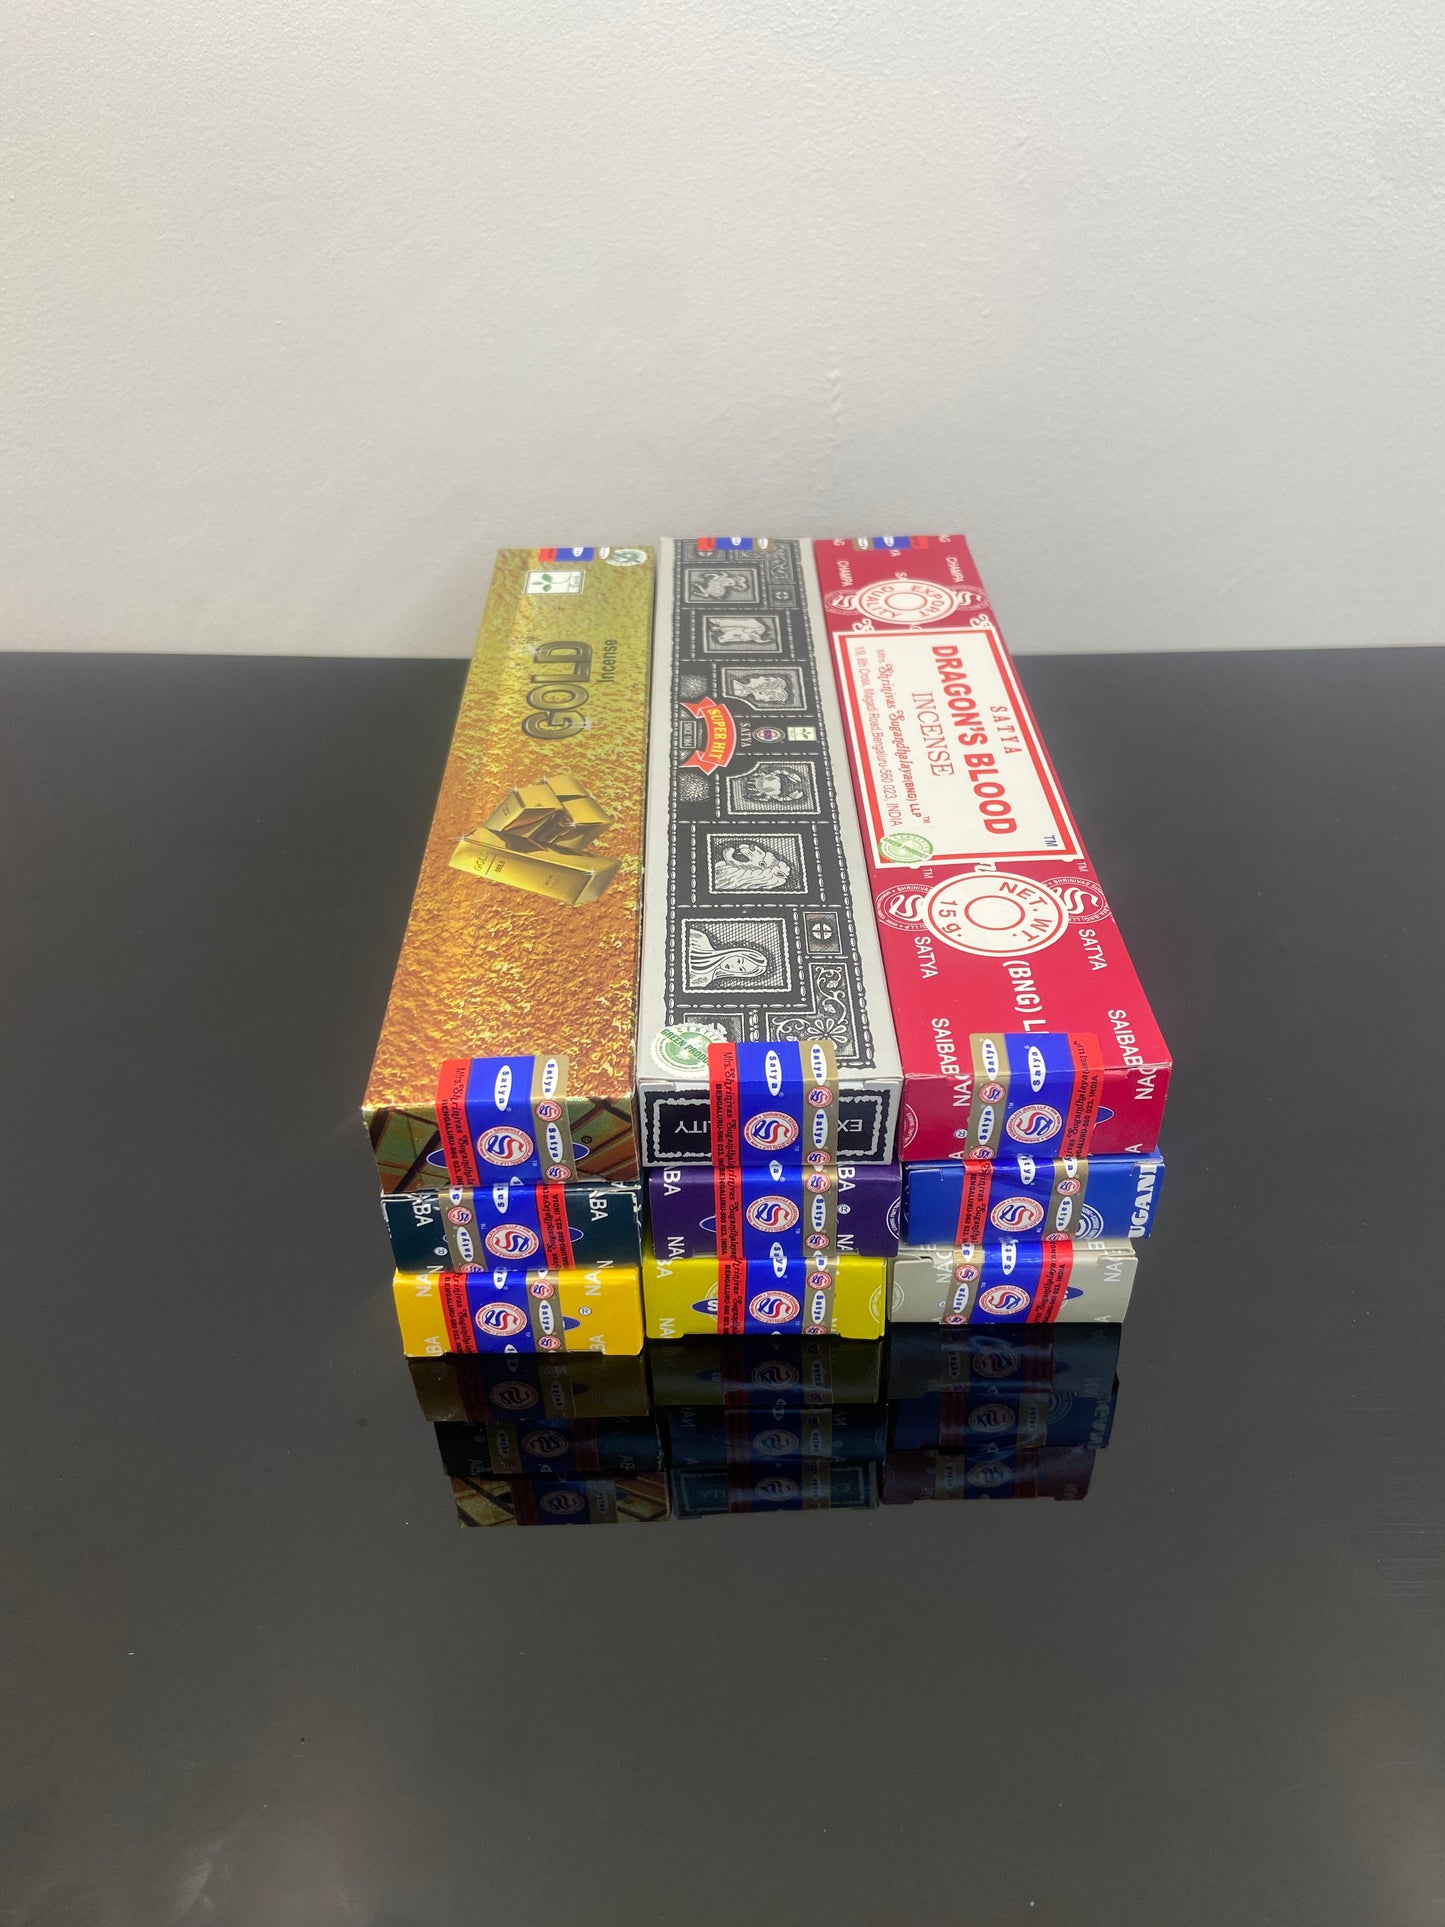 12 Boxes of Incense for £15